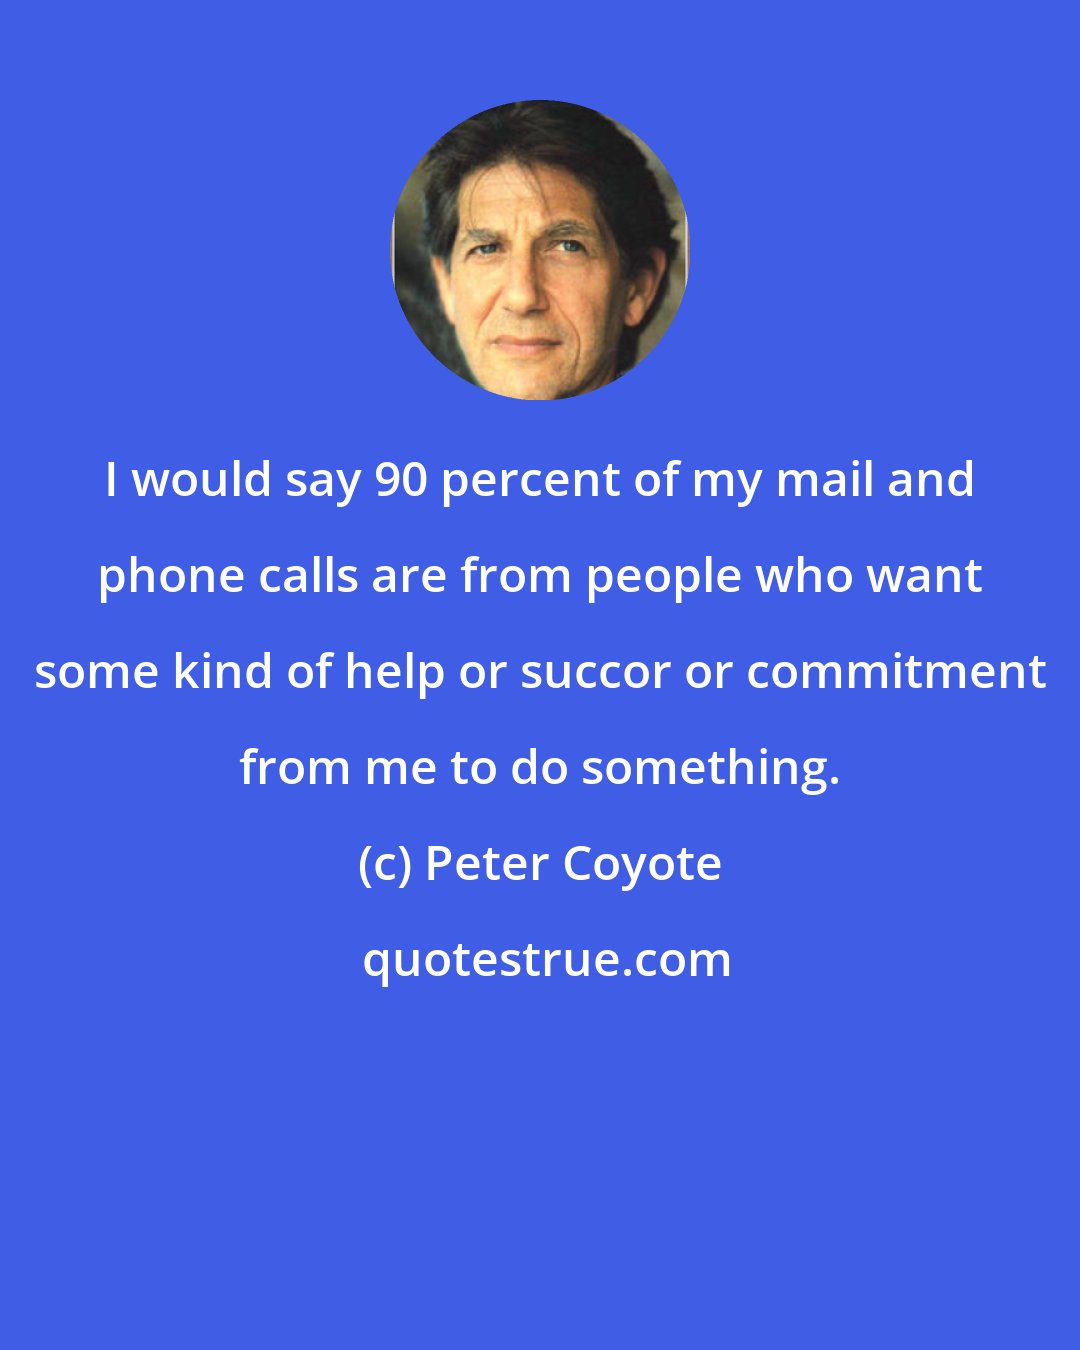 Peter Coyote: I would say 90 percent of my mail and phone calls are from people who want some kind of help or succor or commitment from me to do something.